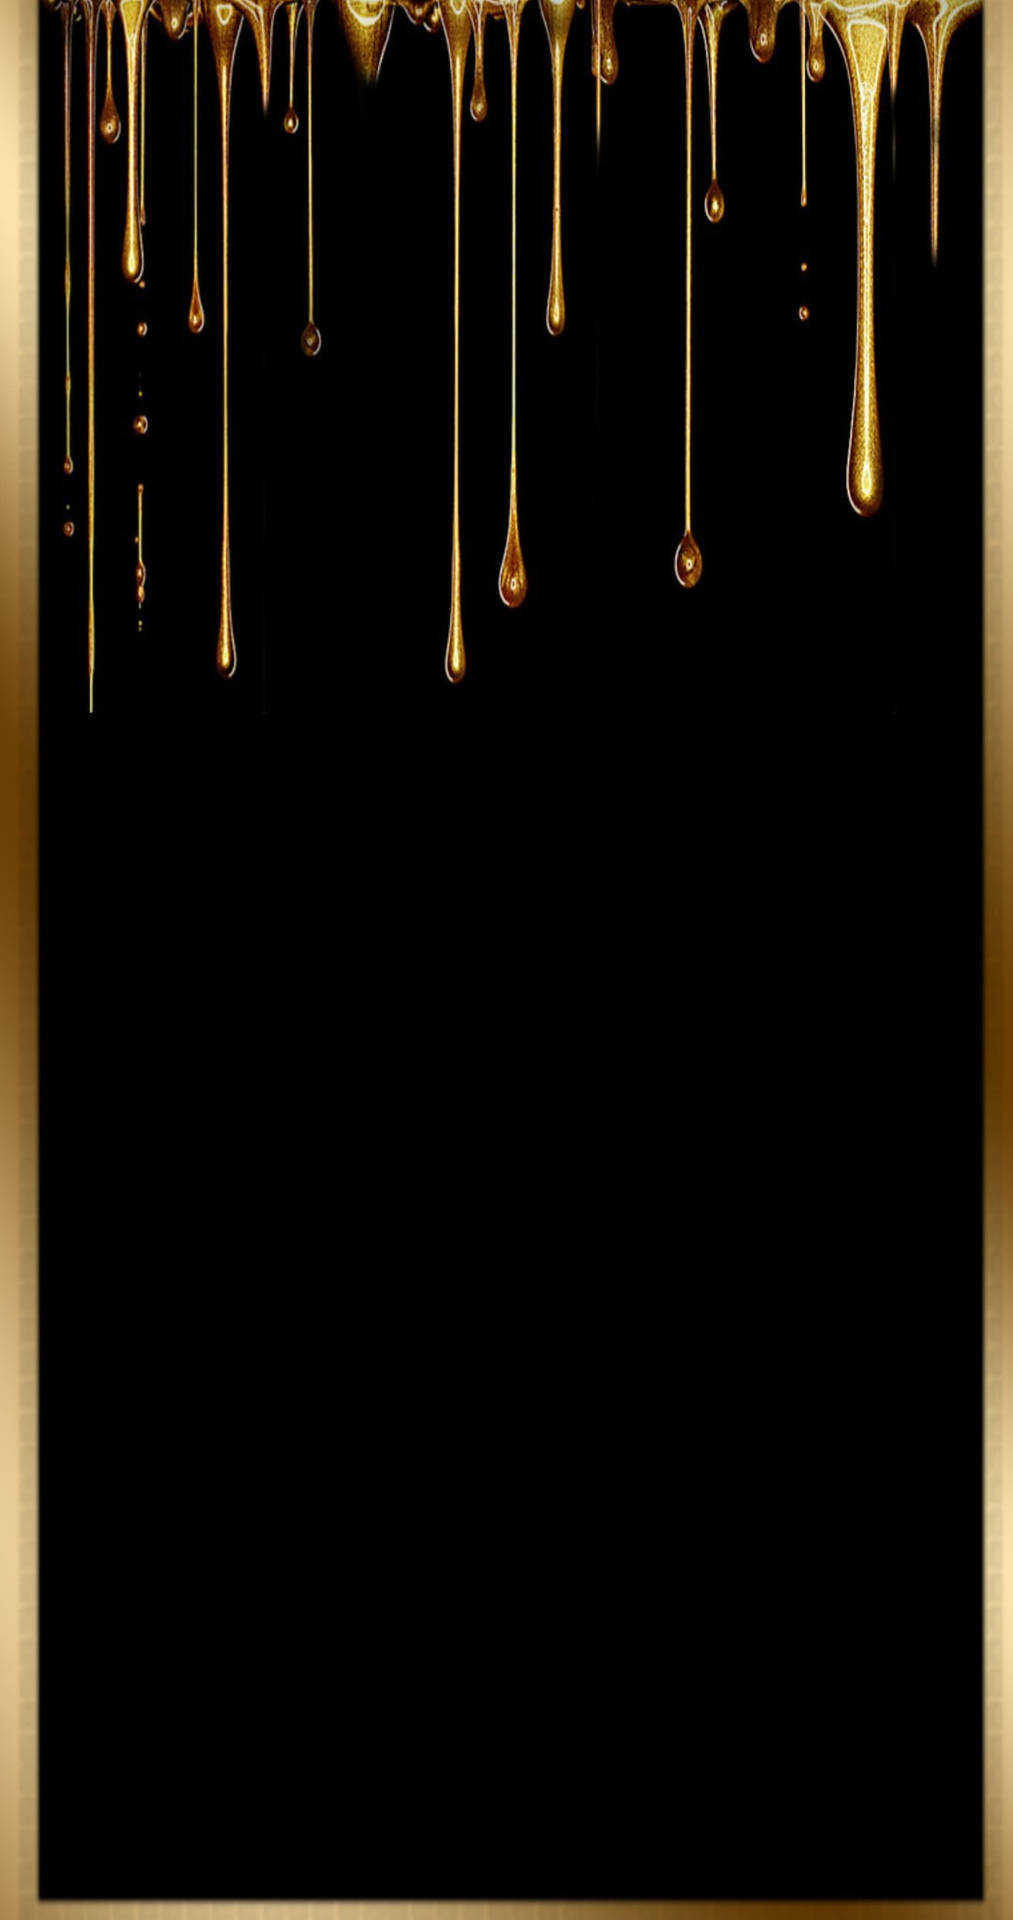 Droplets Black And Gold iPhone Wallpaper